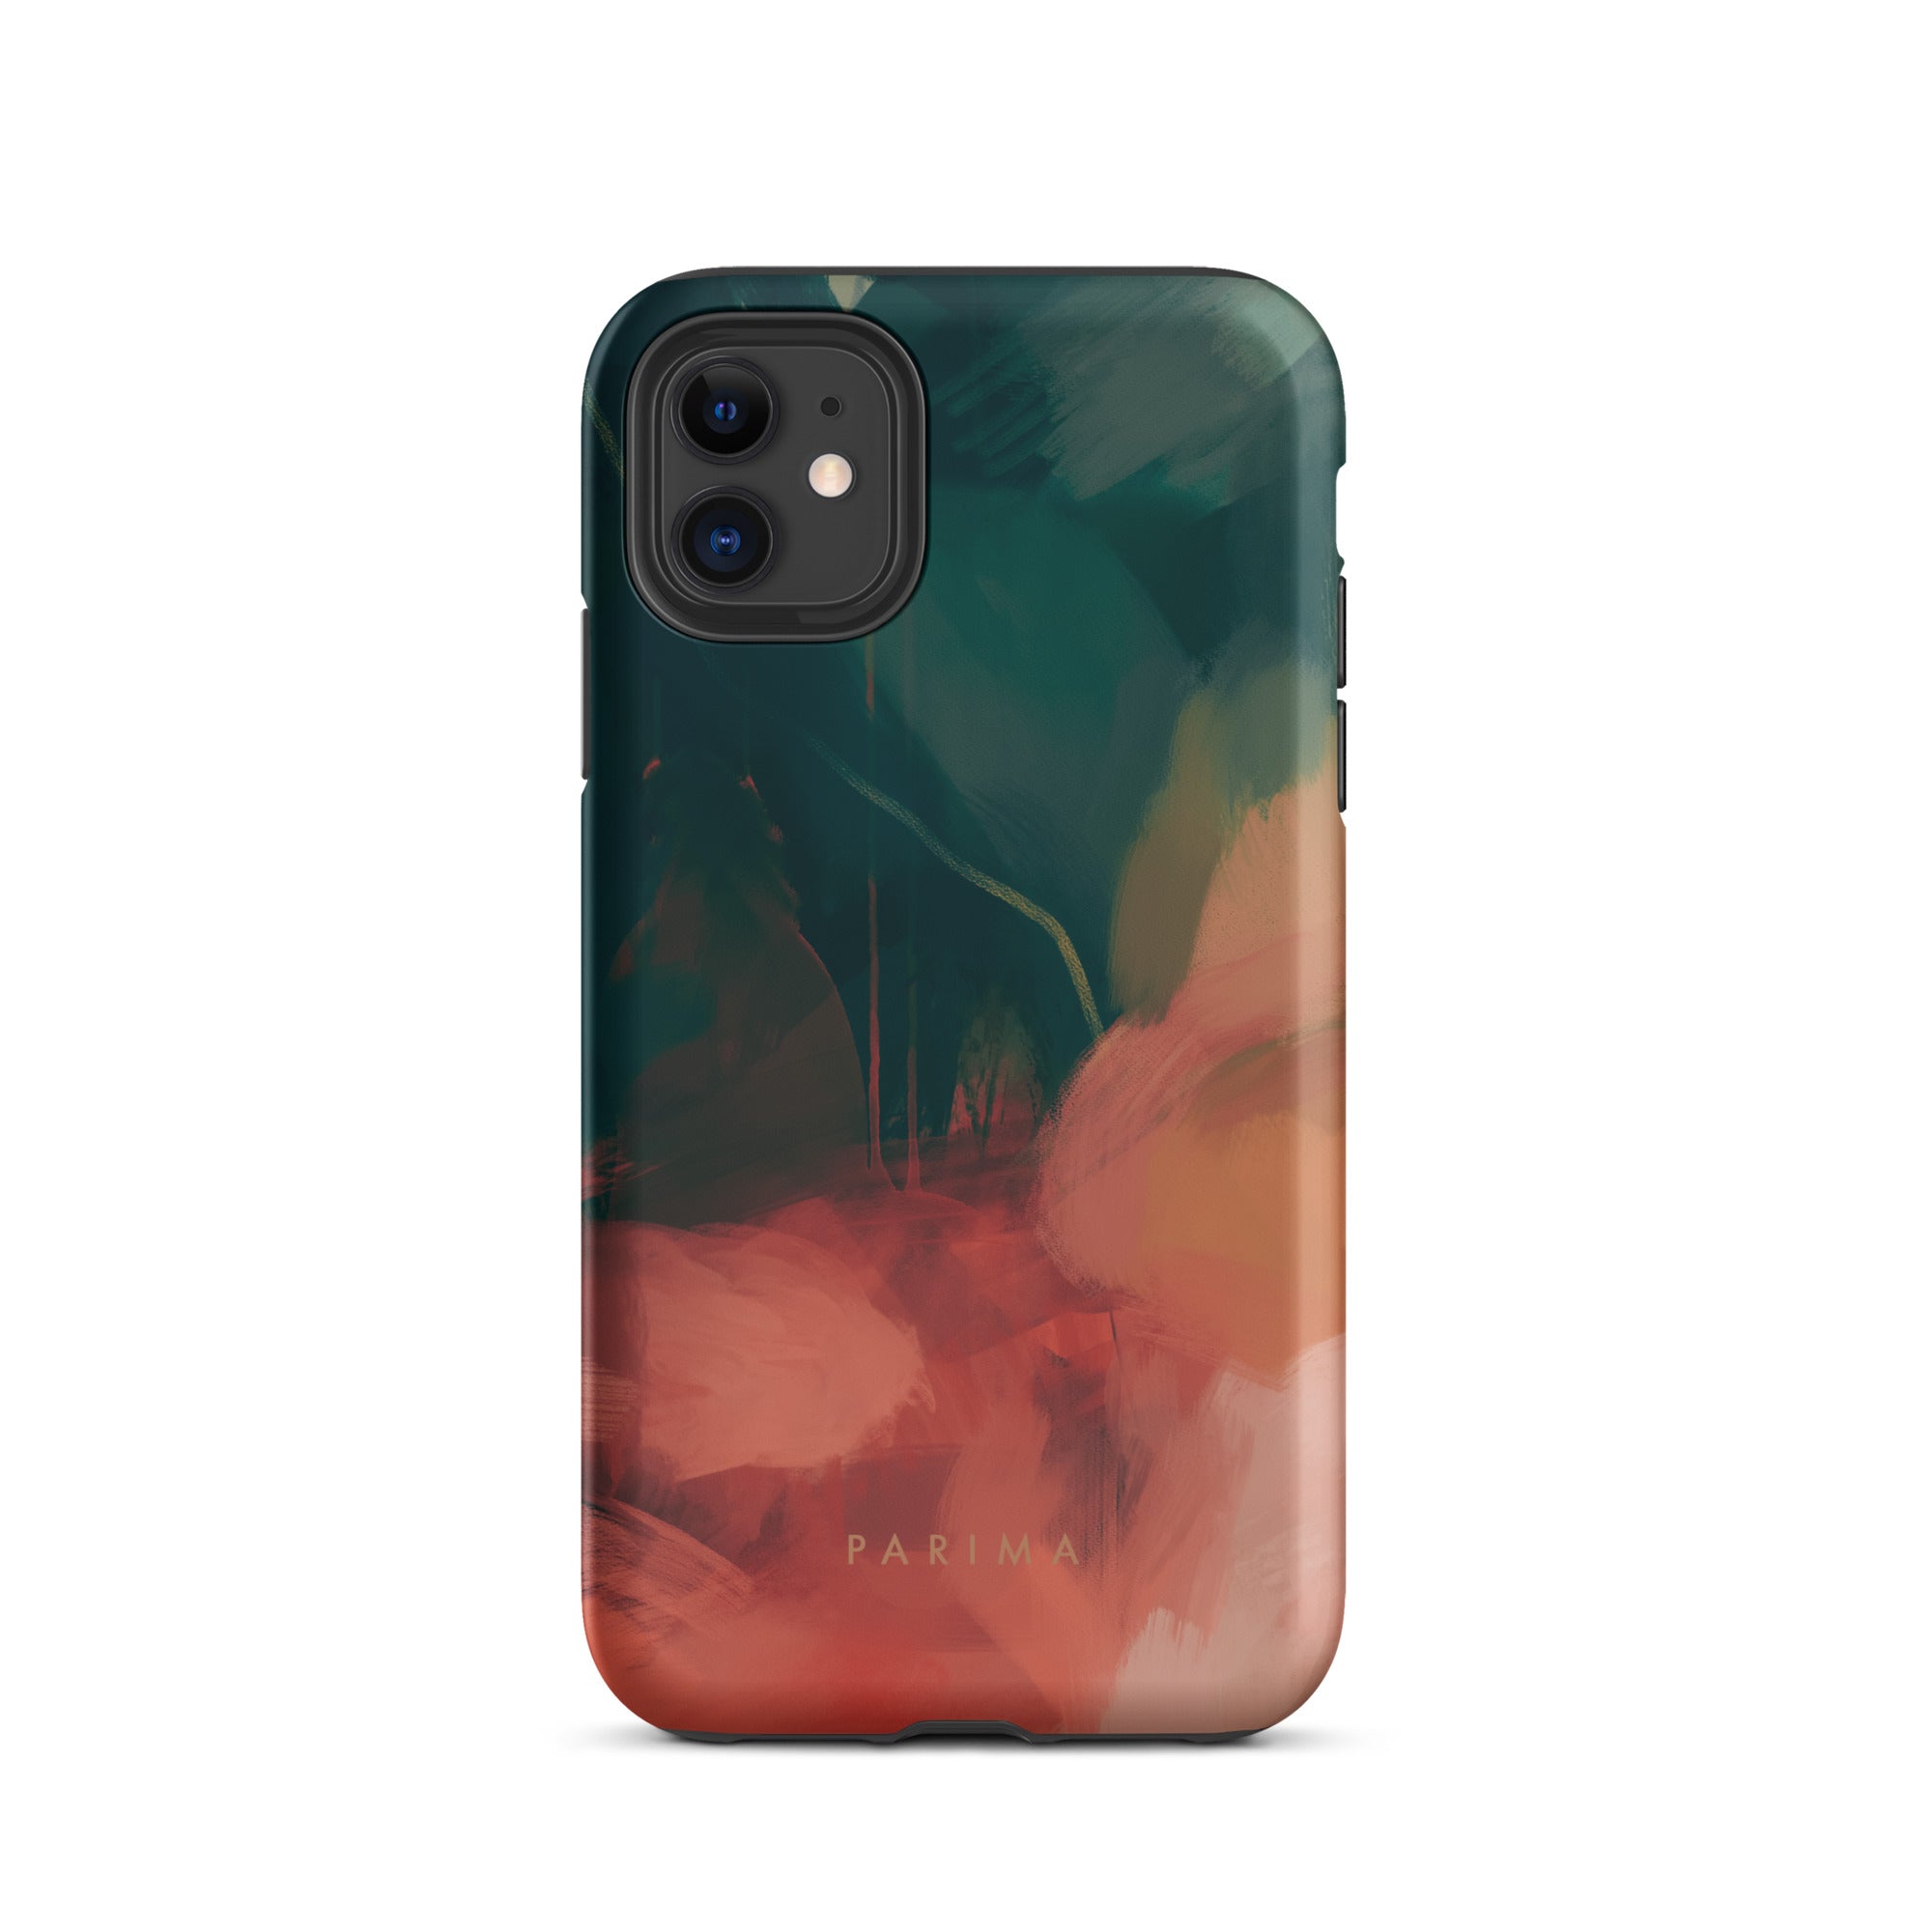 Eventide, green and red abstract art - iPhone 11 tough case by Parima Studio